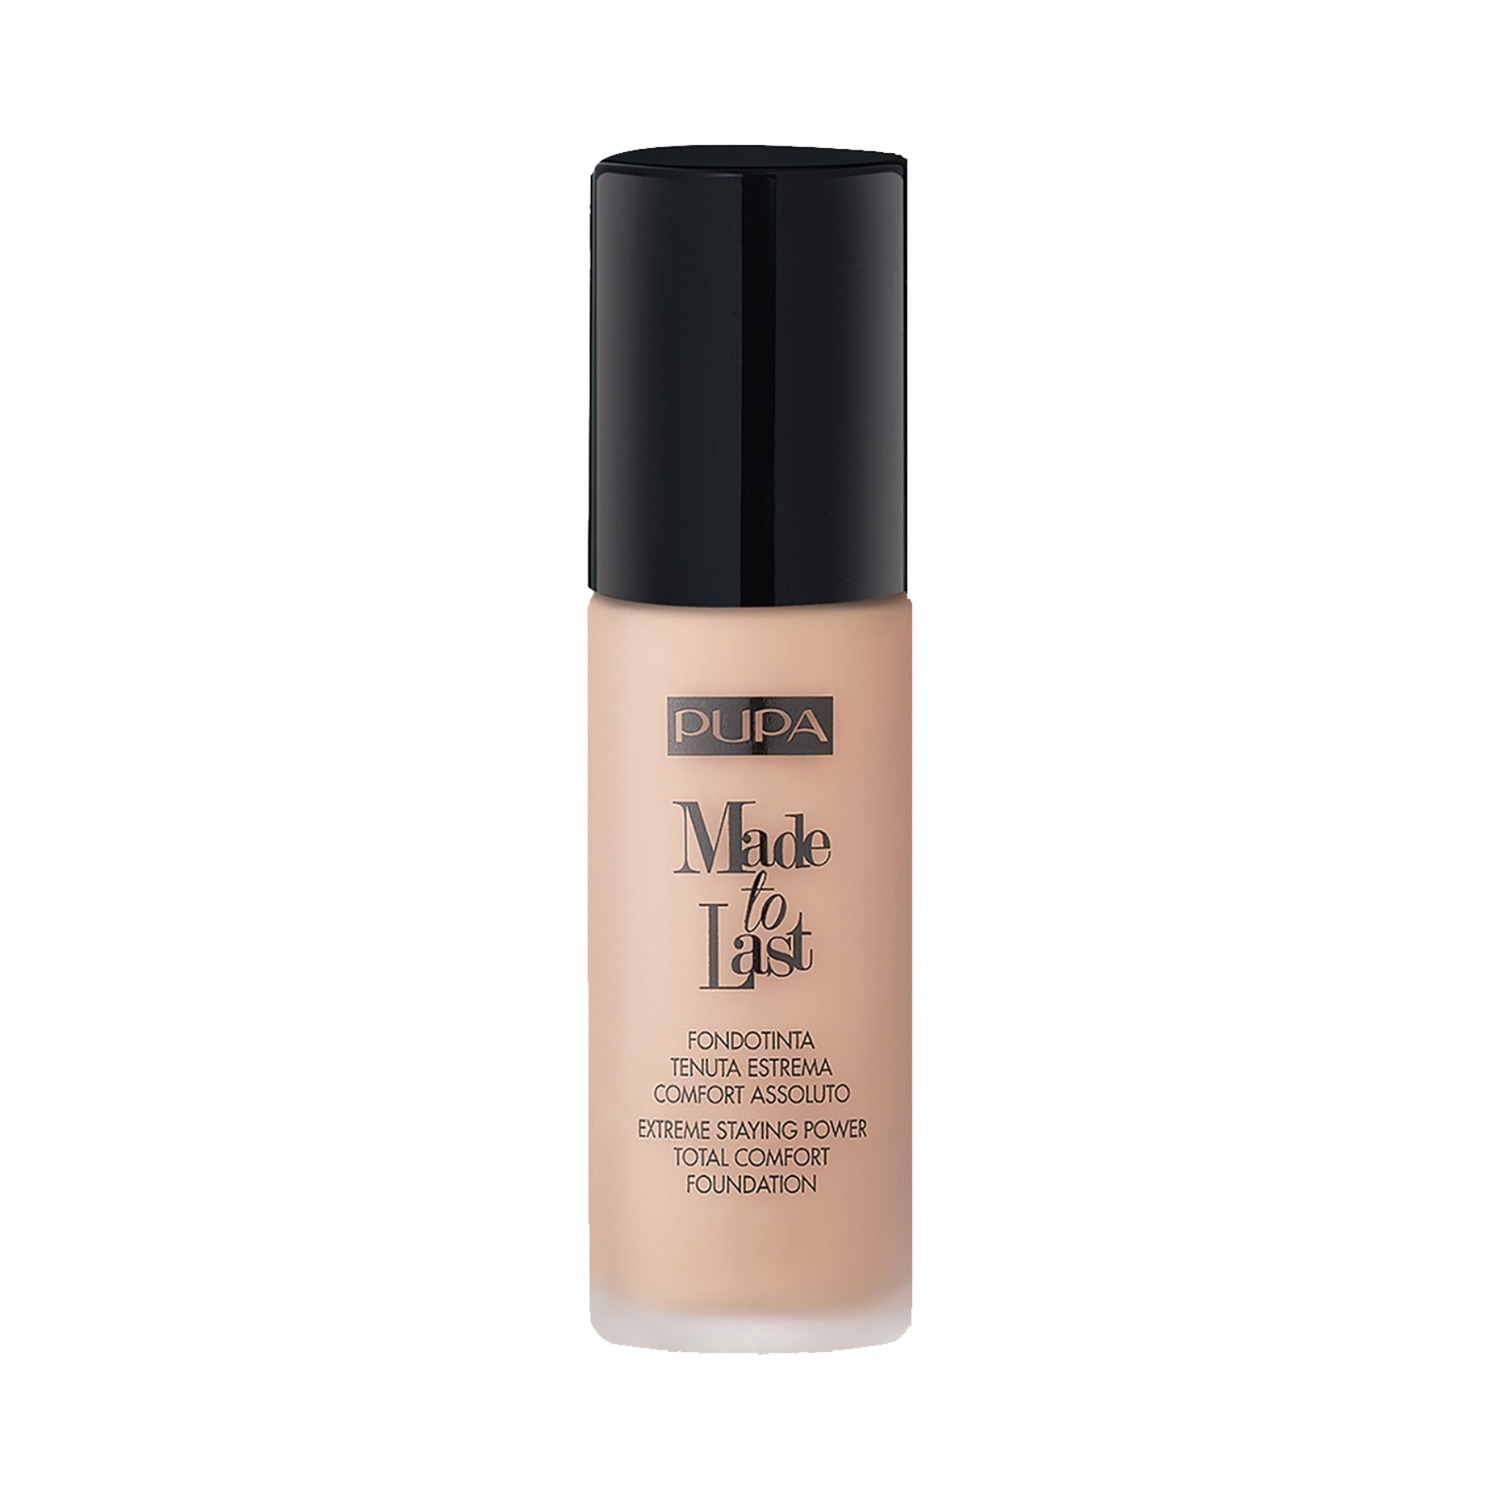 Pupa Milano | Pupa Milano Made To Last Extreme Staying Power Total Comfort Foundation SPF 10 - 060 Golden Beige (30ml)